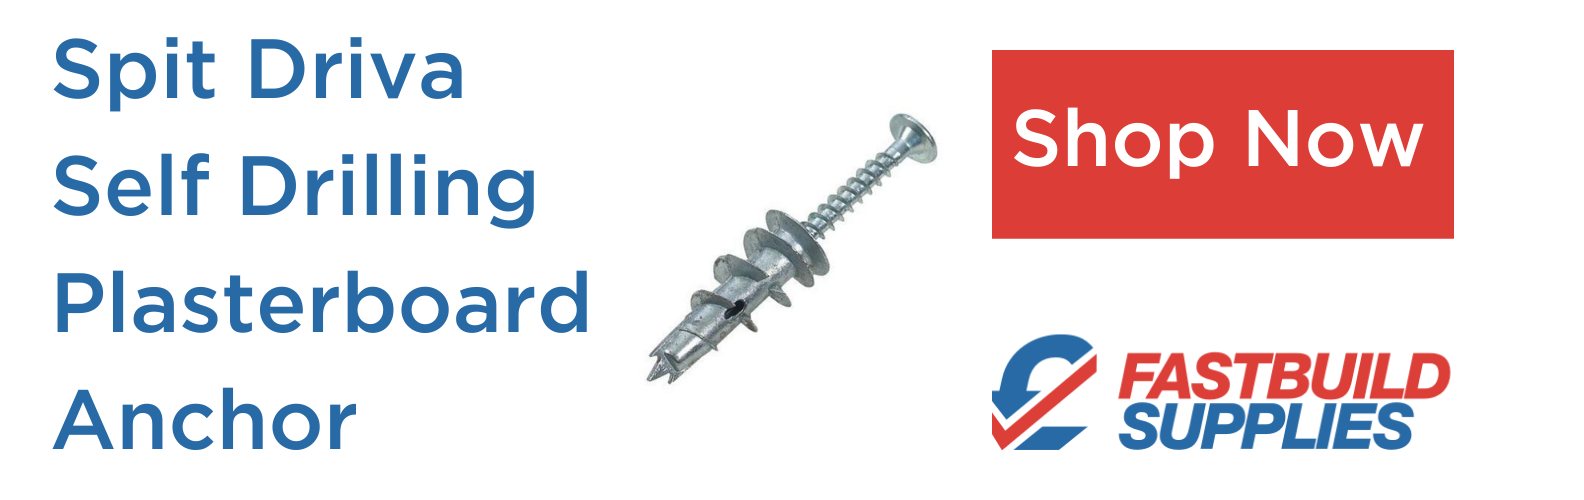 Buy self-drilling plasterboard anchors online